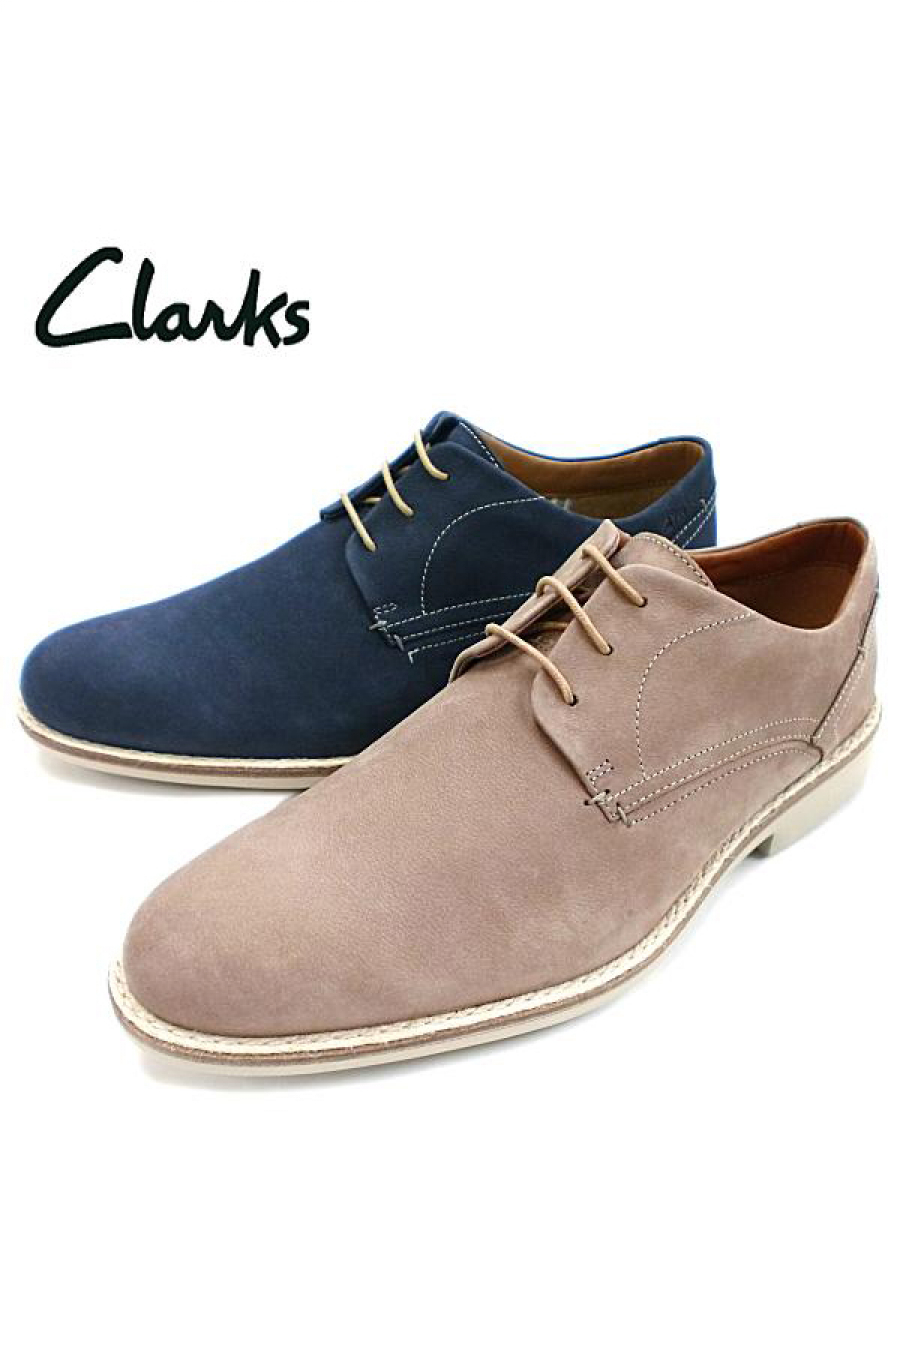 clarks shoes from england